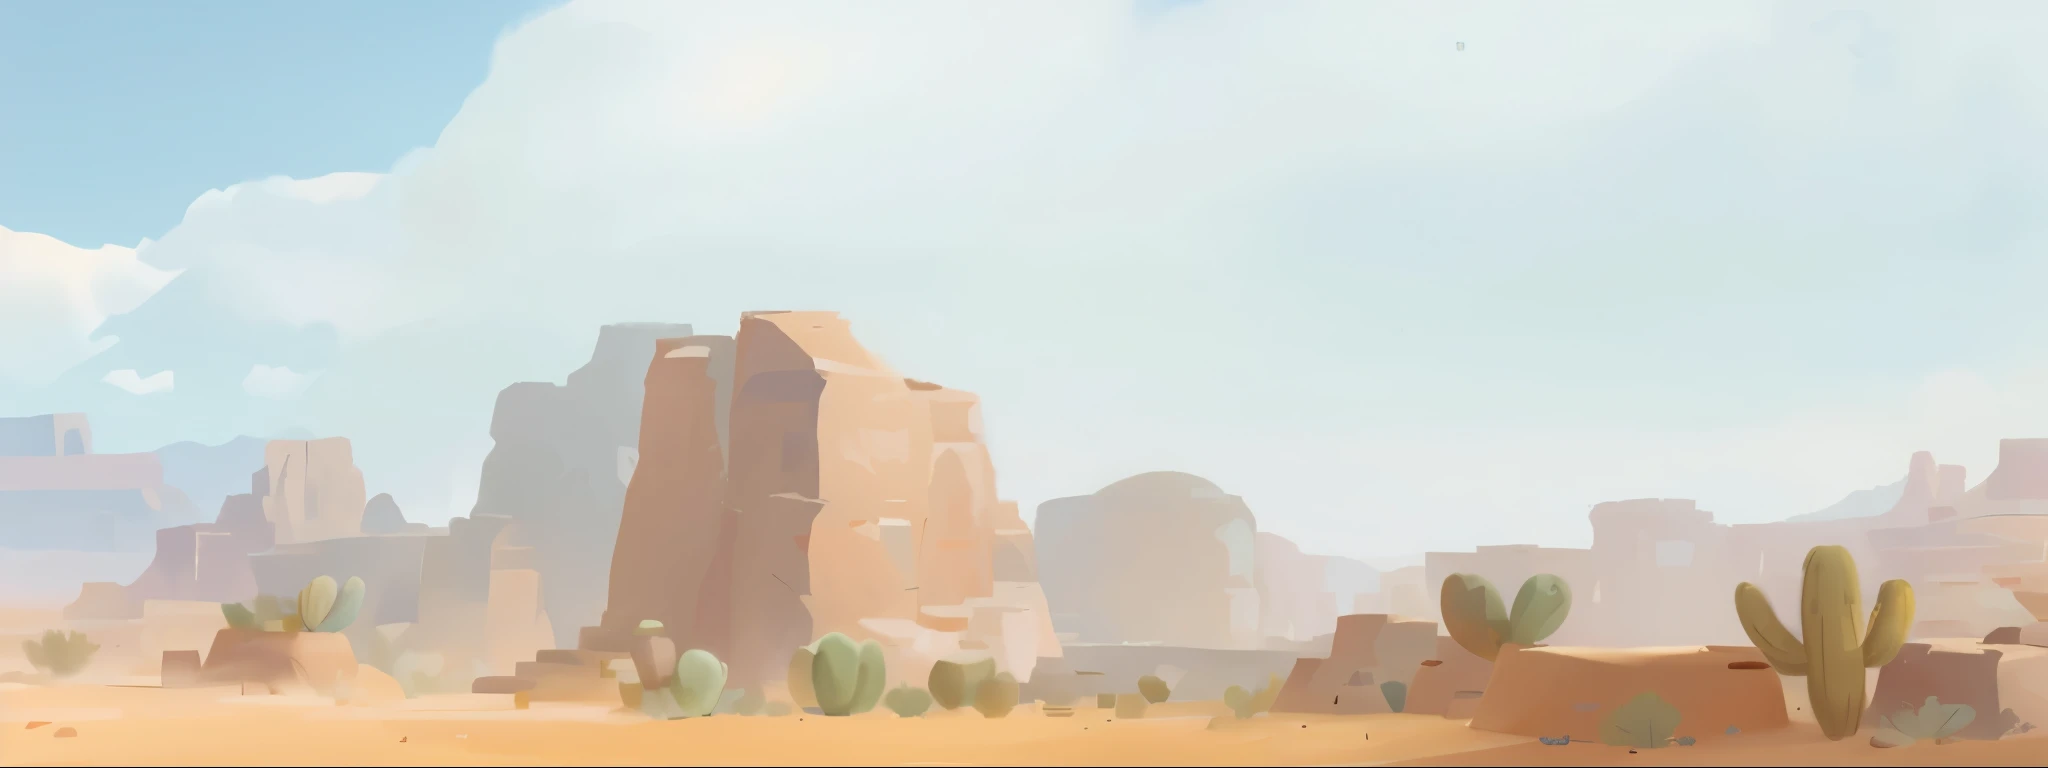 there is a painting of a desert with cactus trees and rocks, style of monument valley, desert environment, background art, desert background, canyon background, background artwork, painted as a game concept art, desert landscape, dusty environment, 2d concept art, desert scenery, scenery game concept art, desert scene, flat desert, indie game concept art, stylized concept art